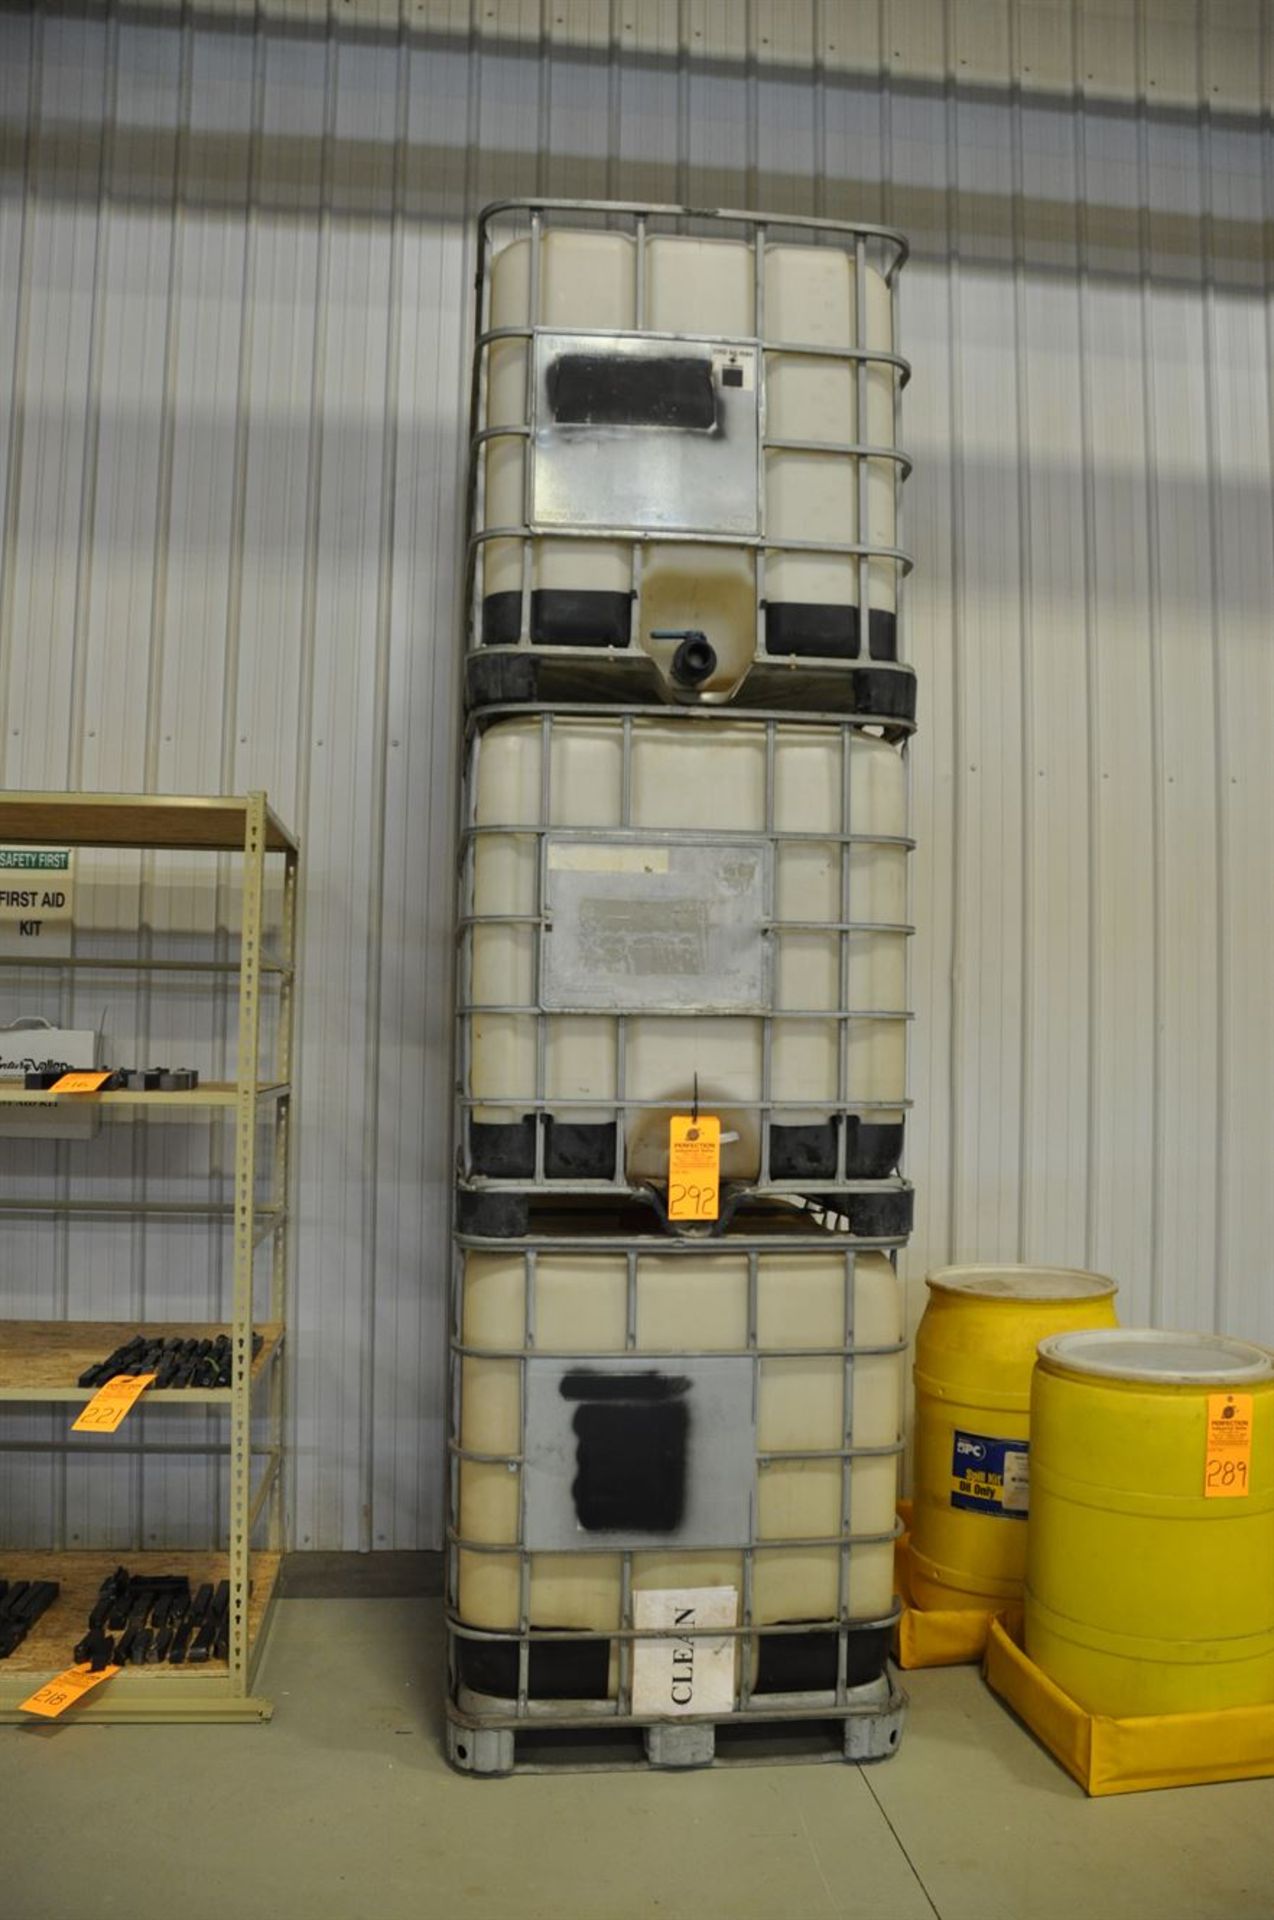 (3) Tote bins, 1000 litre, Note: washed but may contain residual oil and/or glycol